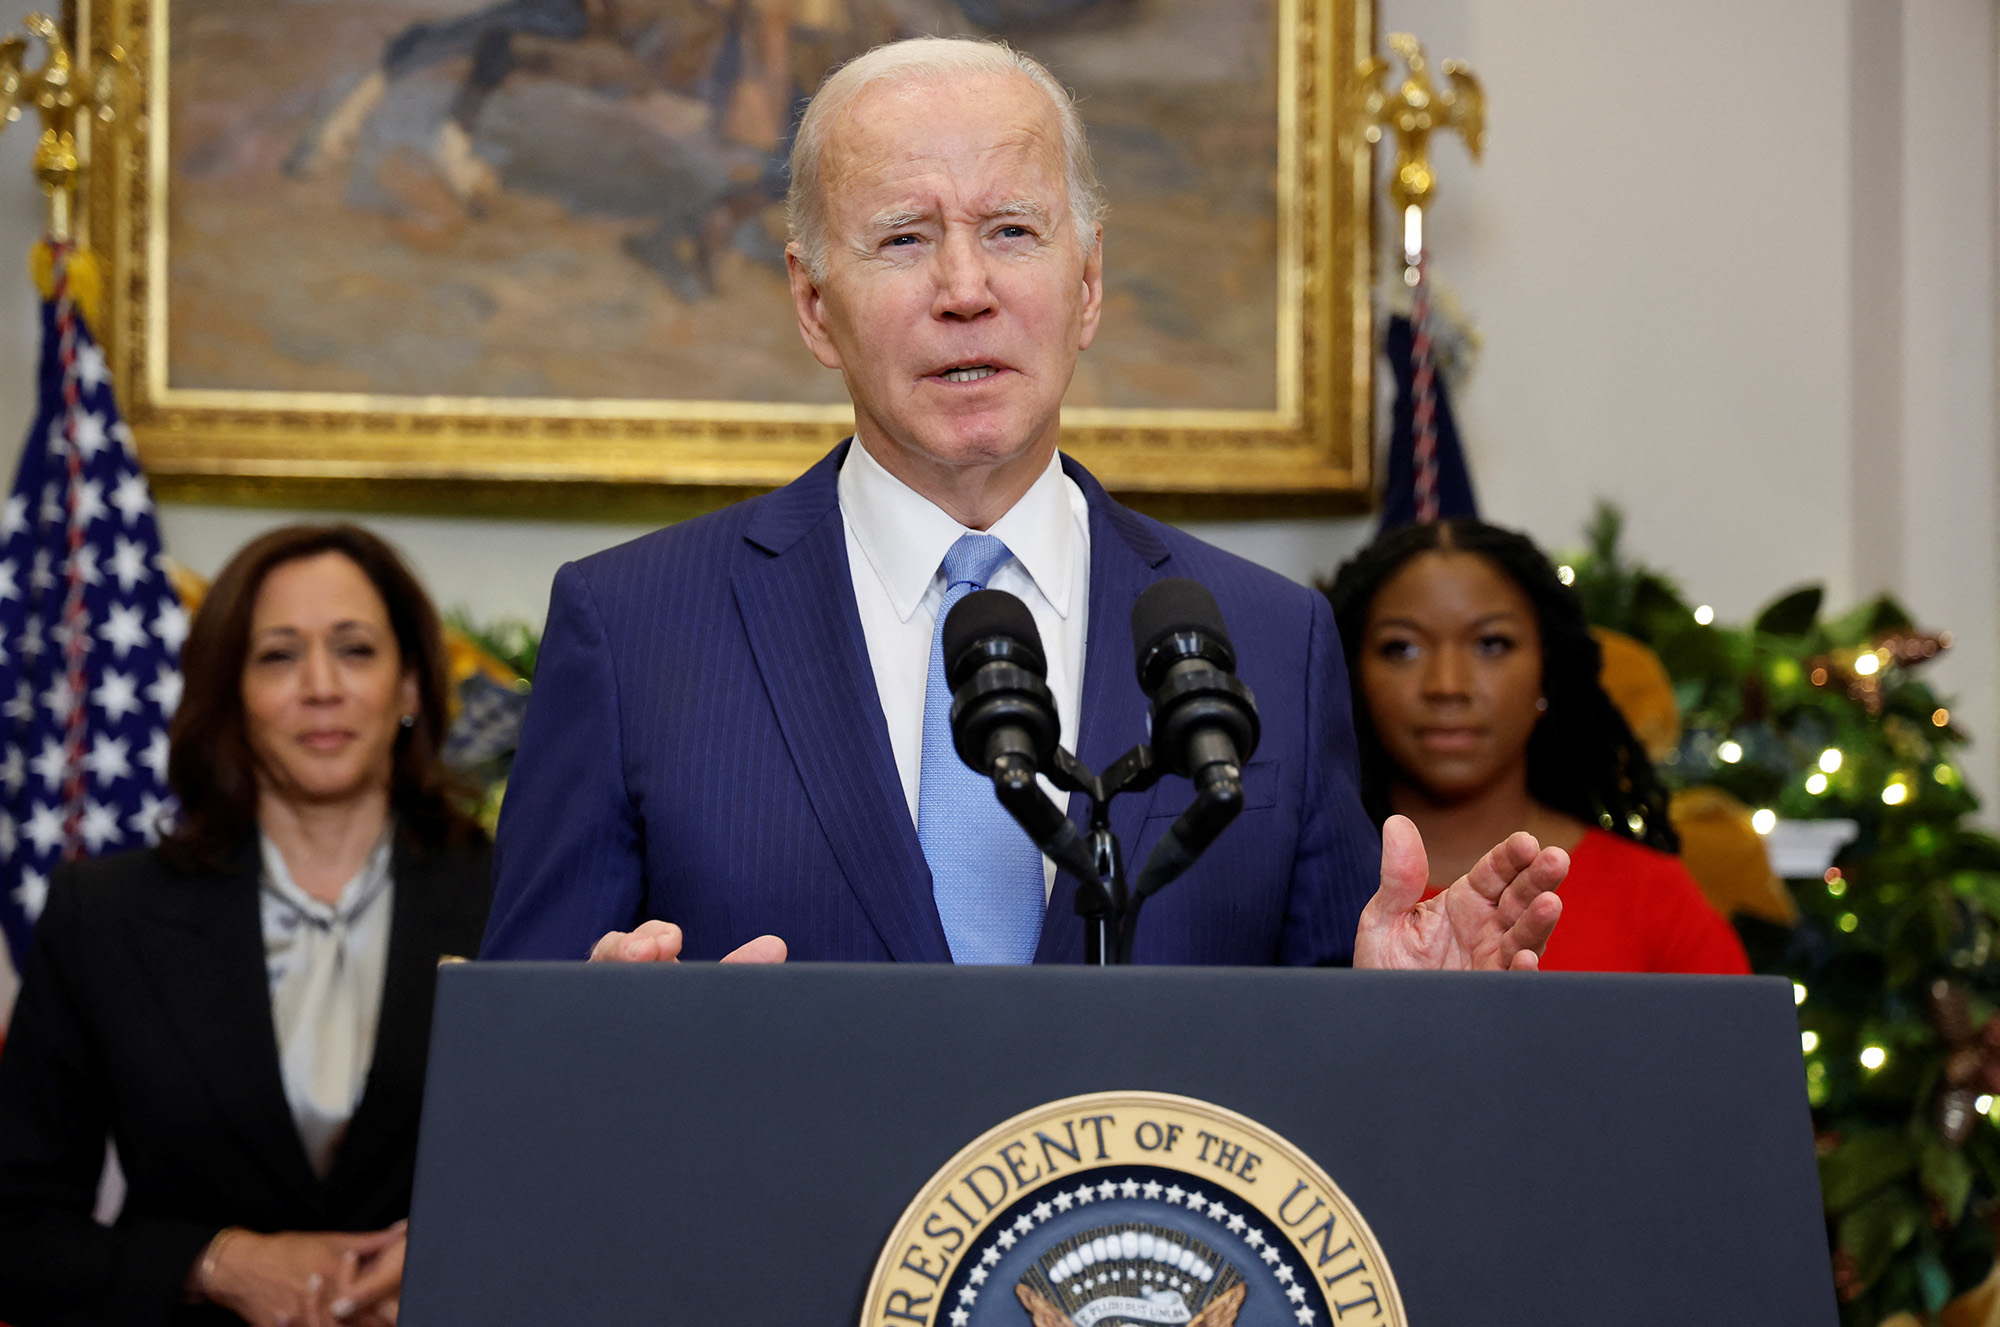 U.S. President Joe Biden speaks to reporters about the release of WNBA basketball star Brittney Griner by Russia, as Vice President Kamala Harris and Cherelle Griner listen, in the Roosevelt Room at the White House in Washington D.C, on December 8.